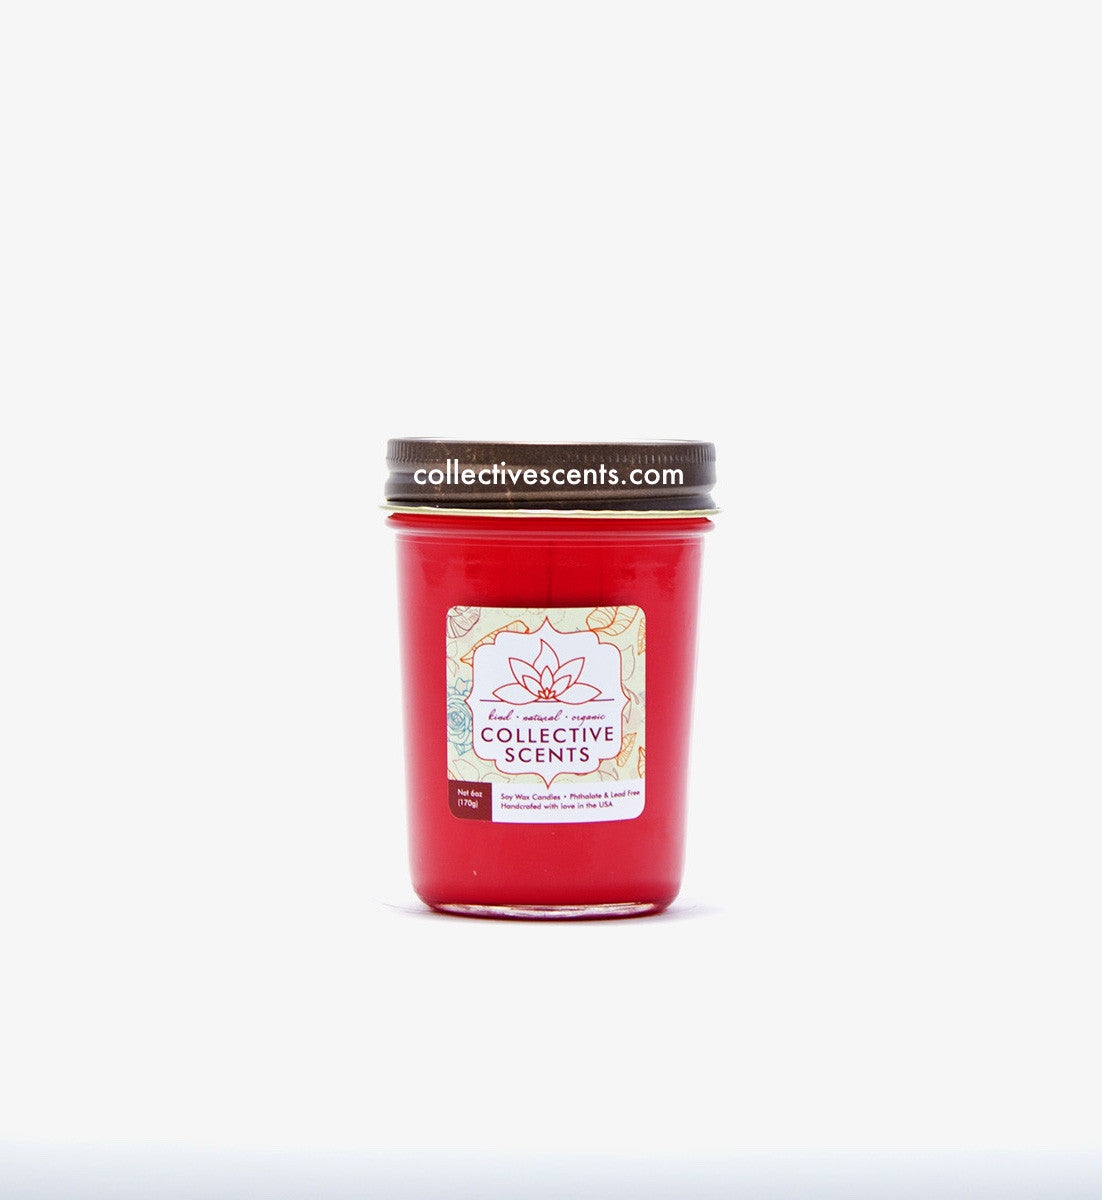 8oz jar Watermelon Soy Candle/Collectivescents.com